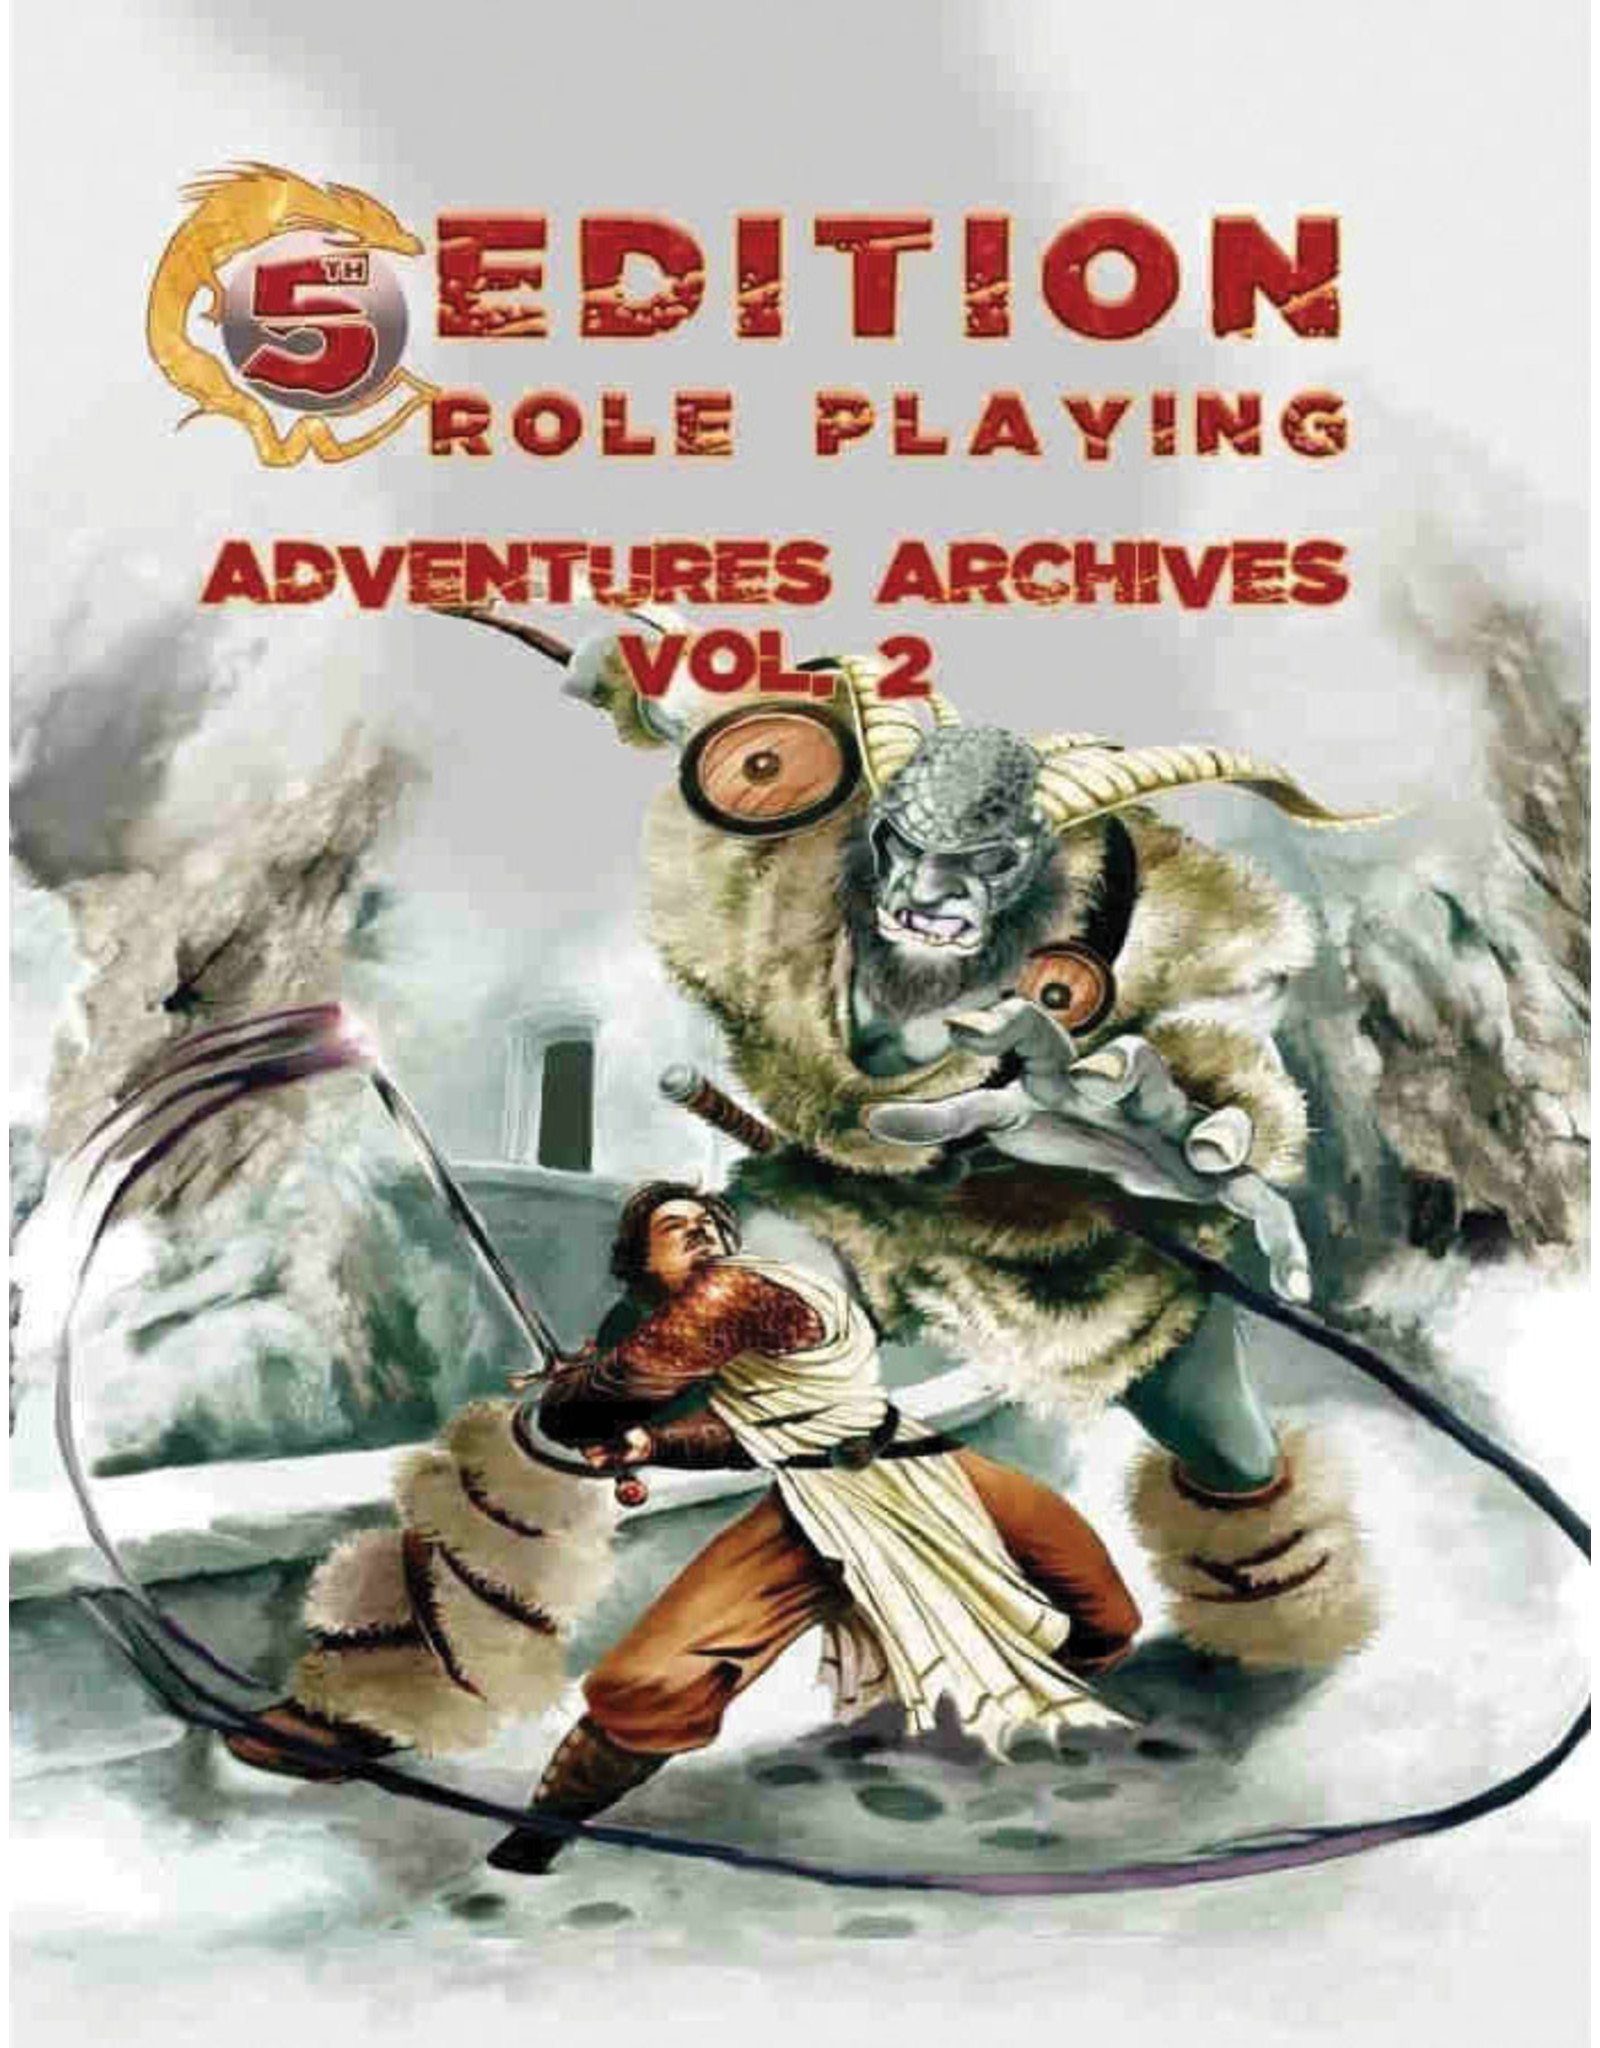 5th Edition Archives vol 2